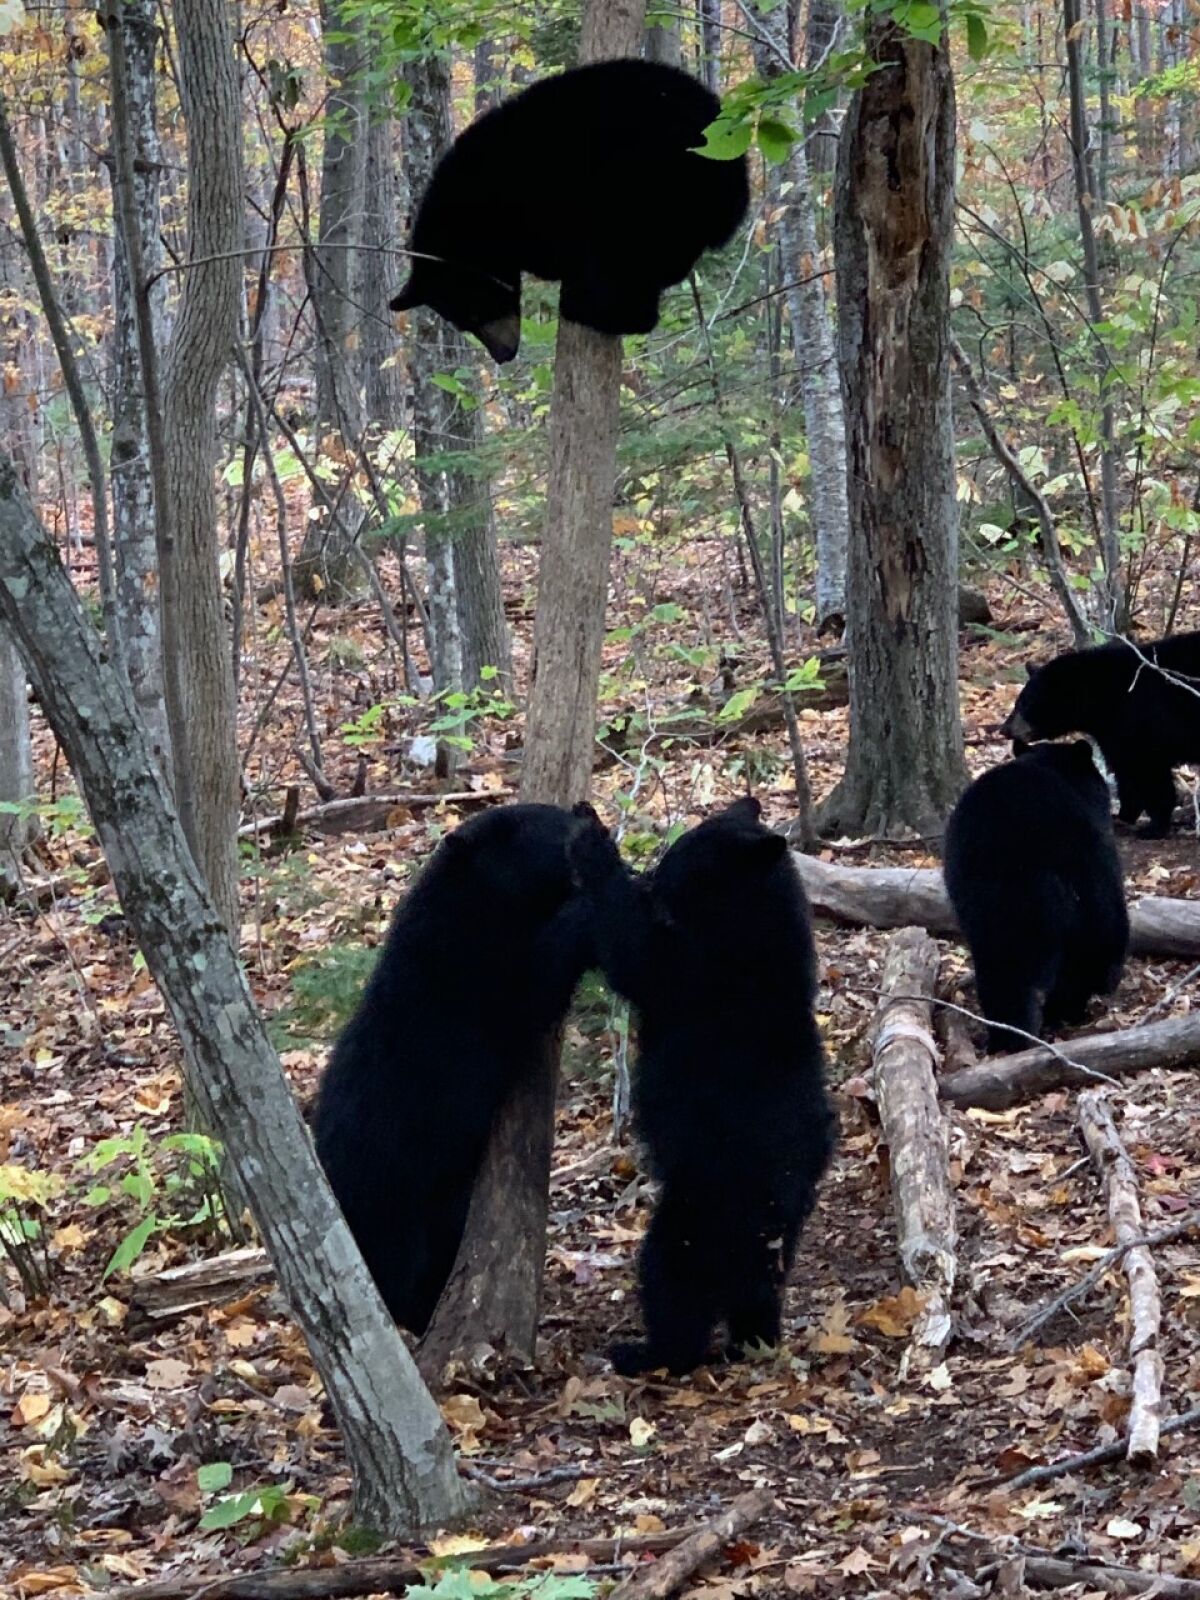 Black bear cubs interact at the Kilham Bear Center in Lyme, New Hampshire